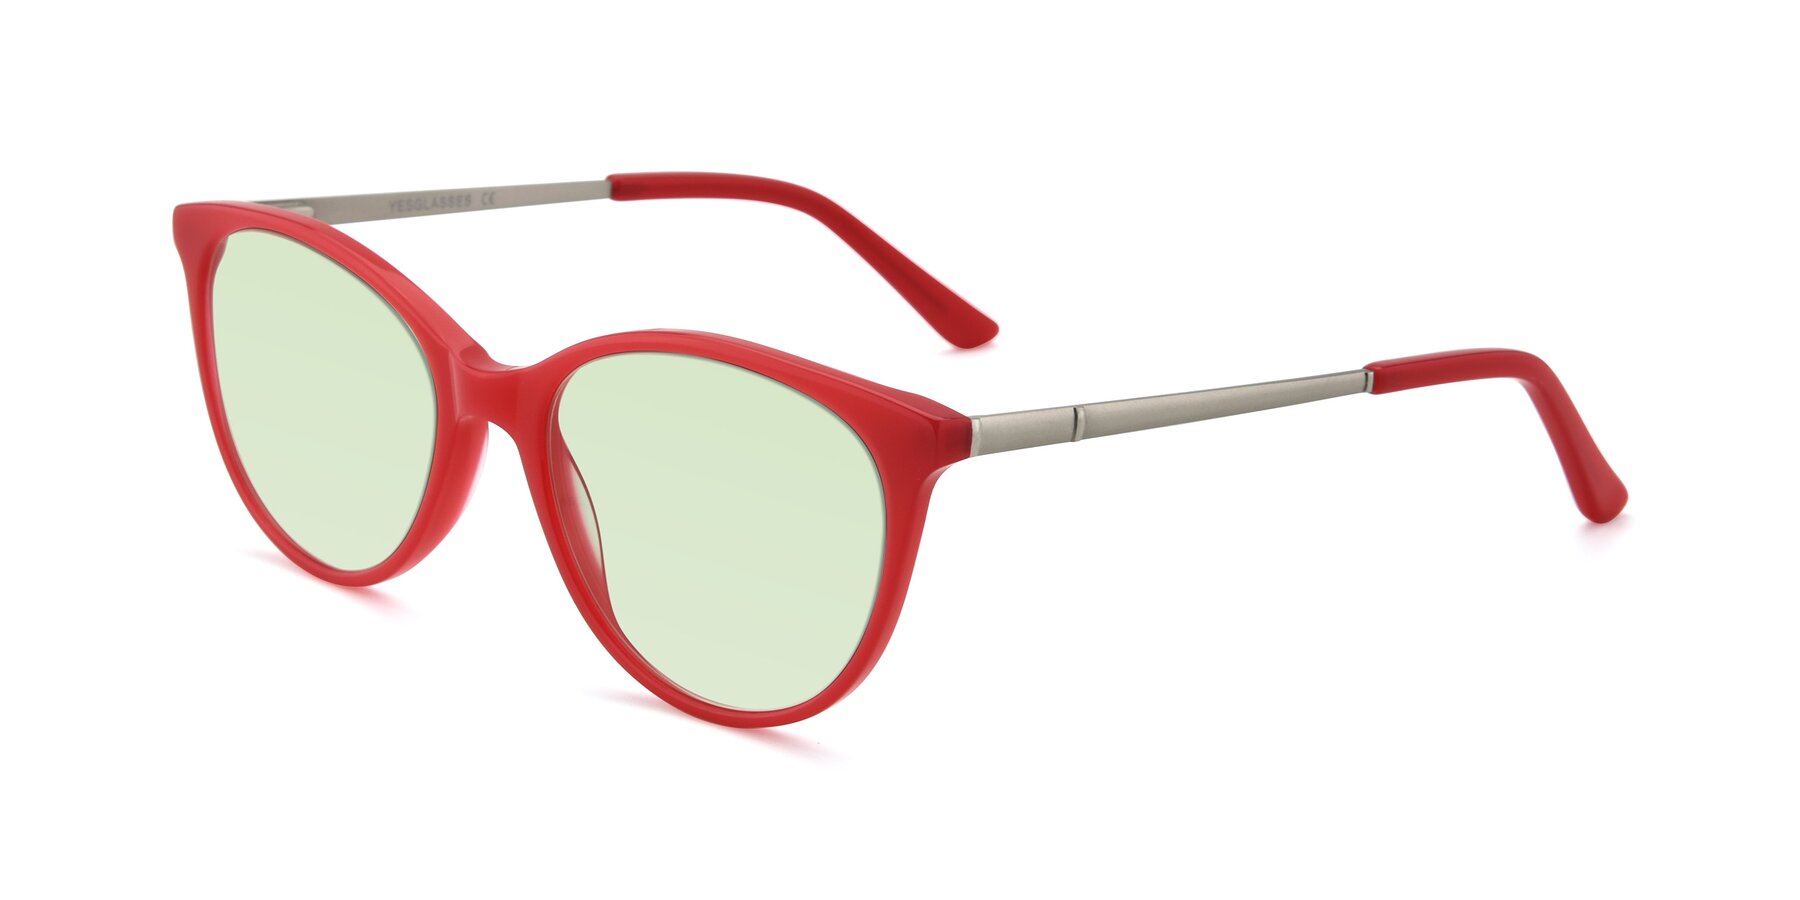 Angle of SR6062 in Rose with Light Green Tinted Lenses